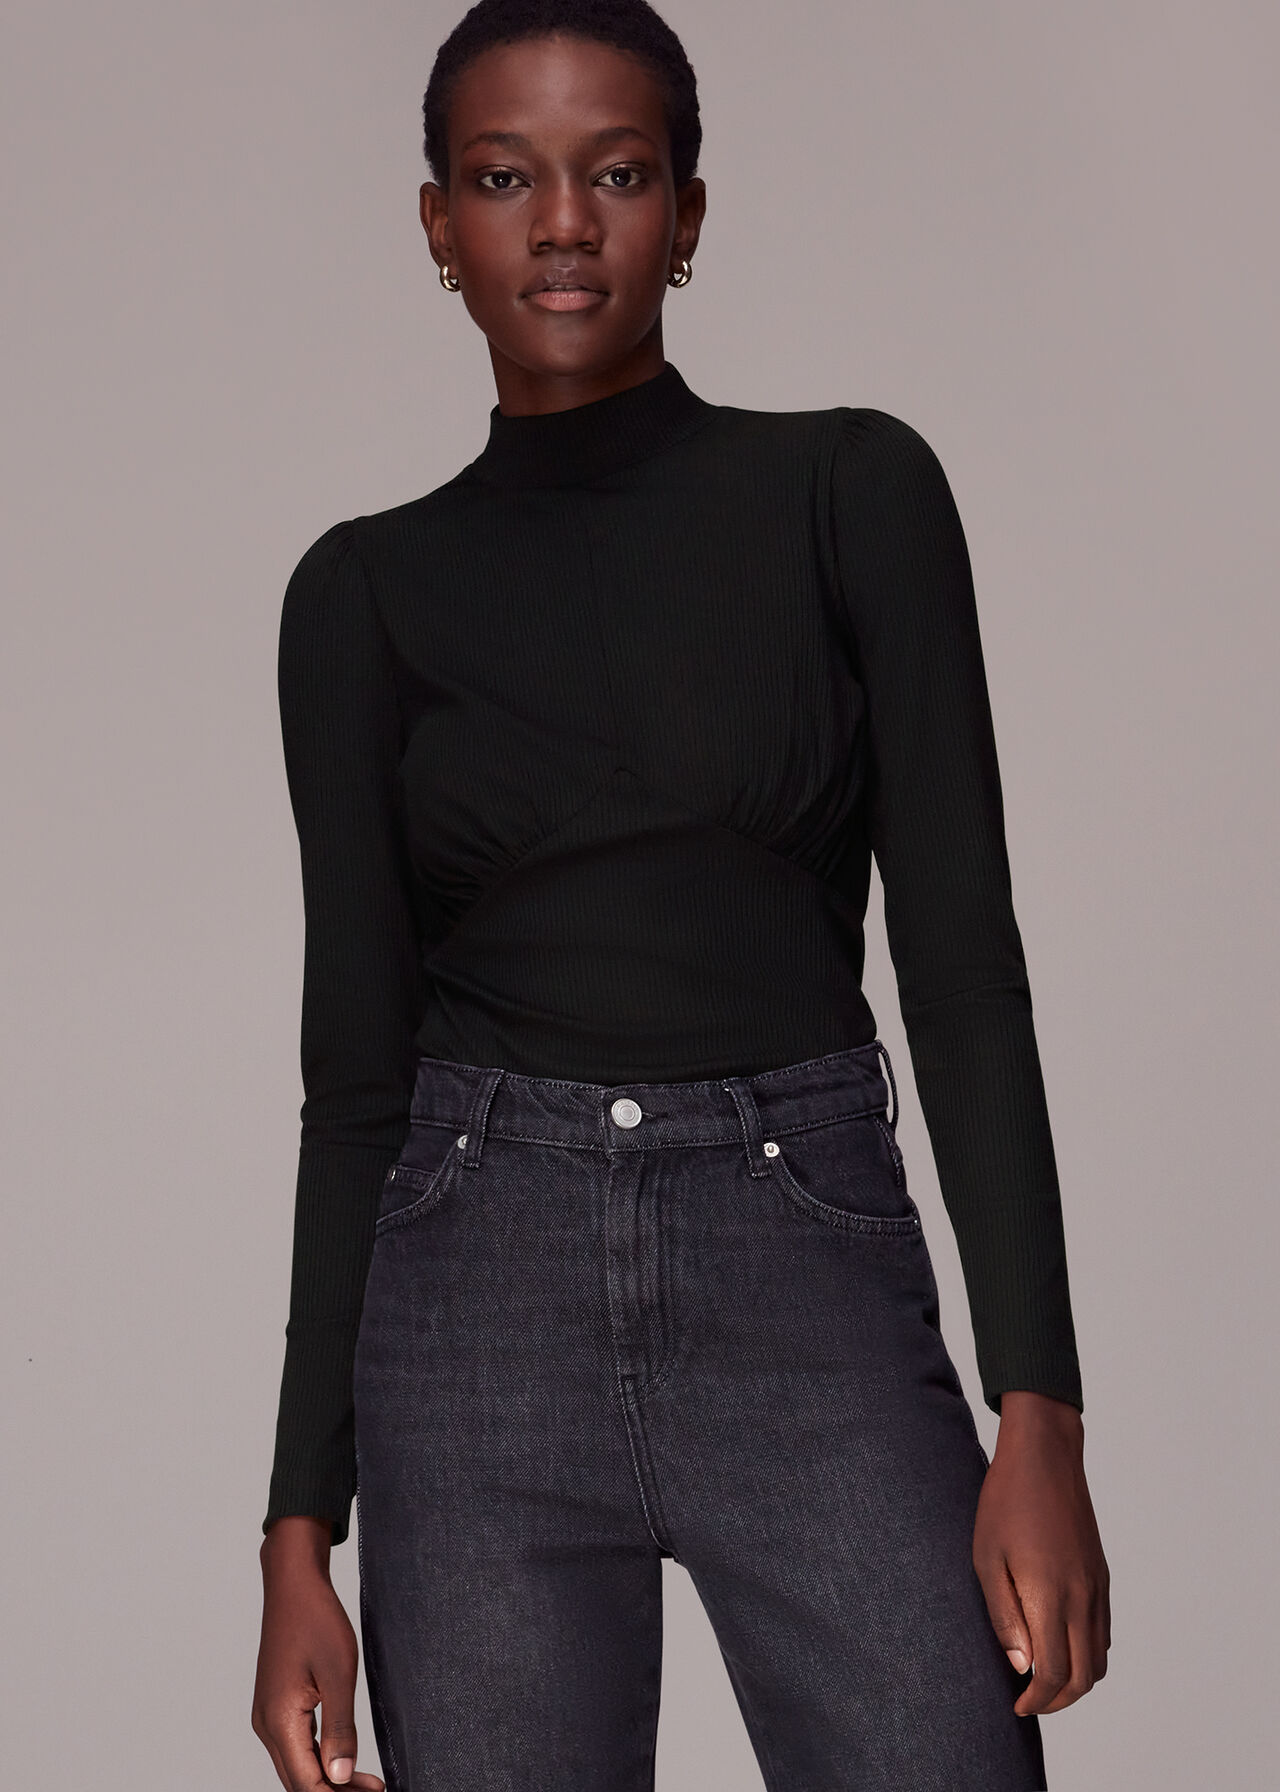 Black Gathered Bust Top | WHISTLES